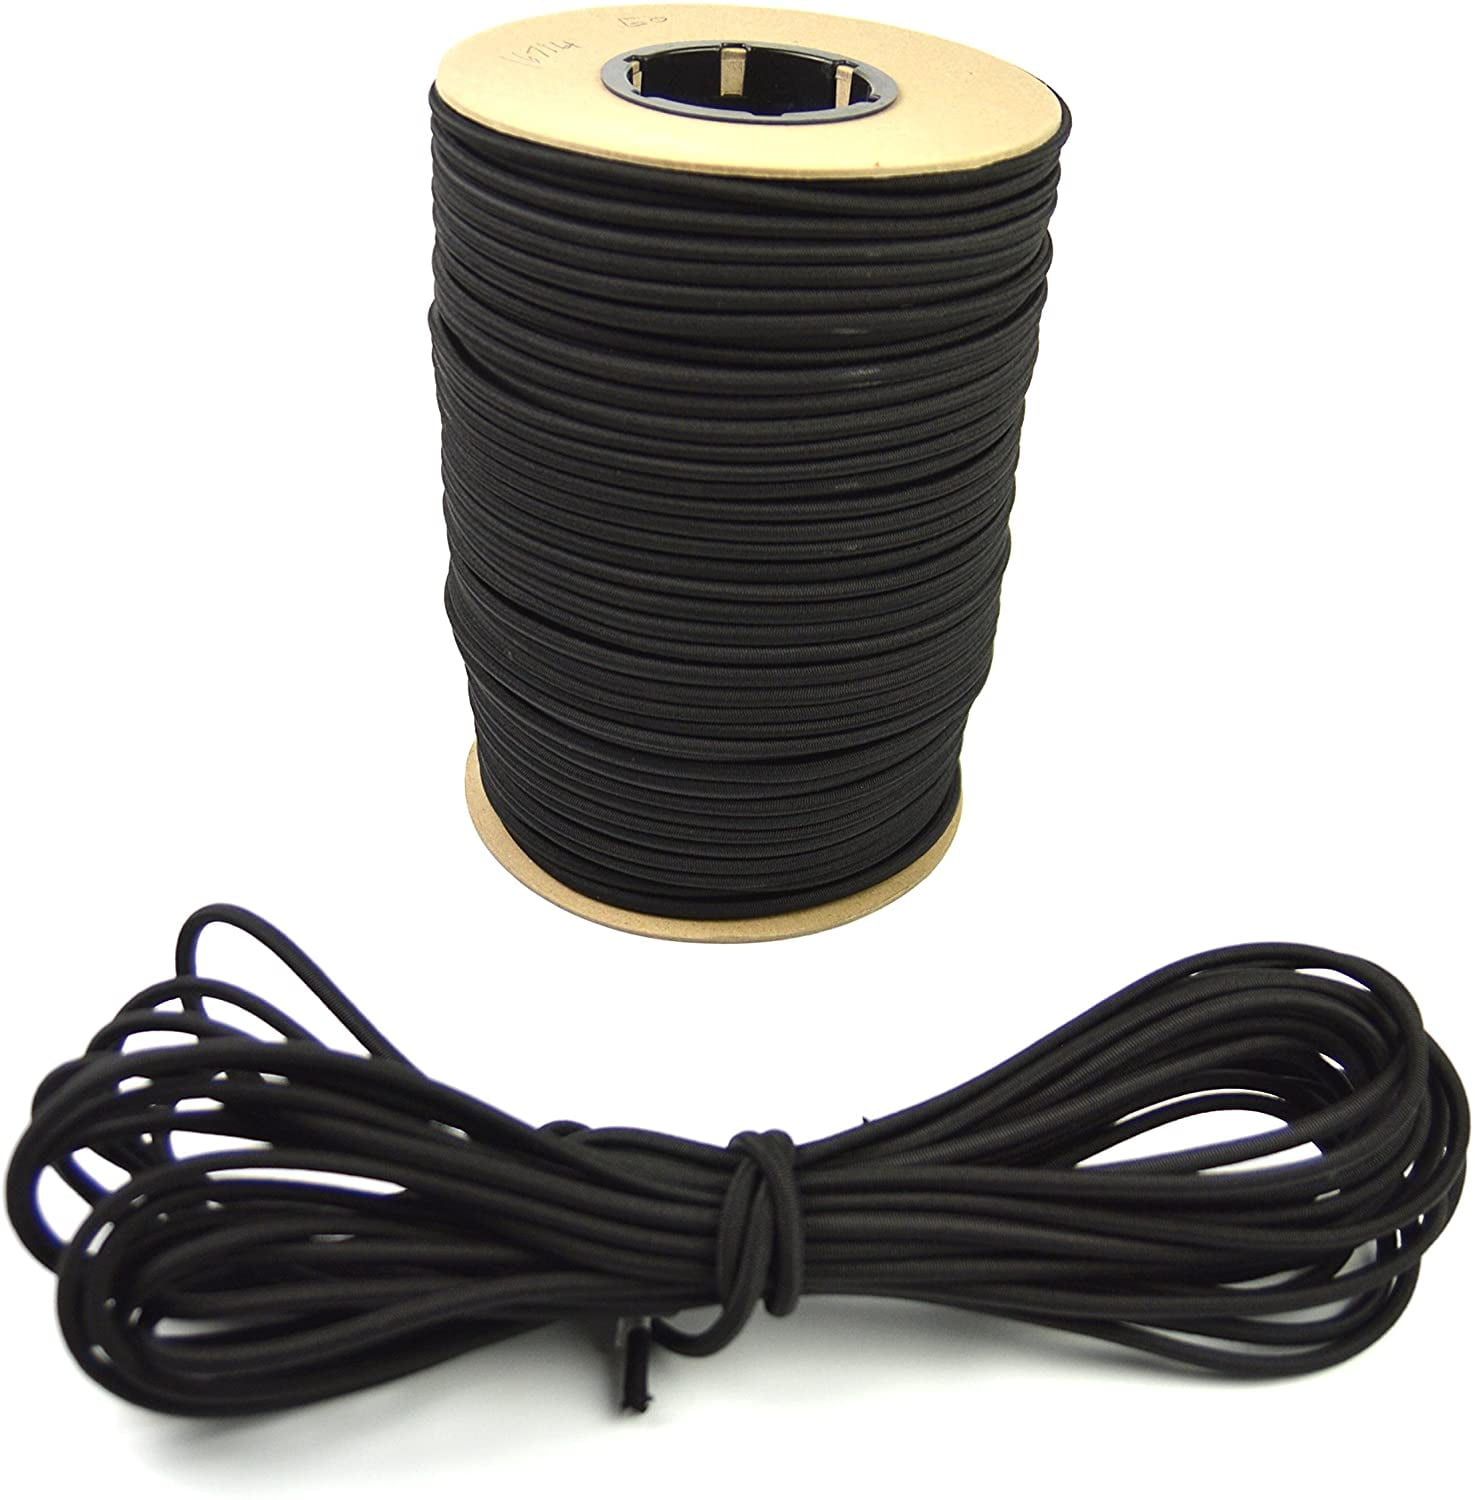 100ft 1/4" White Bungee Cord Marine Grade Heavy Duty Shock Rope Tie Down Stretch 